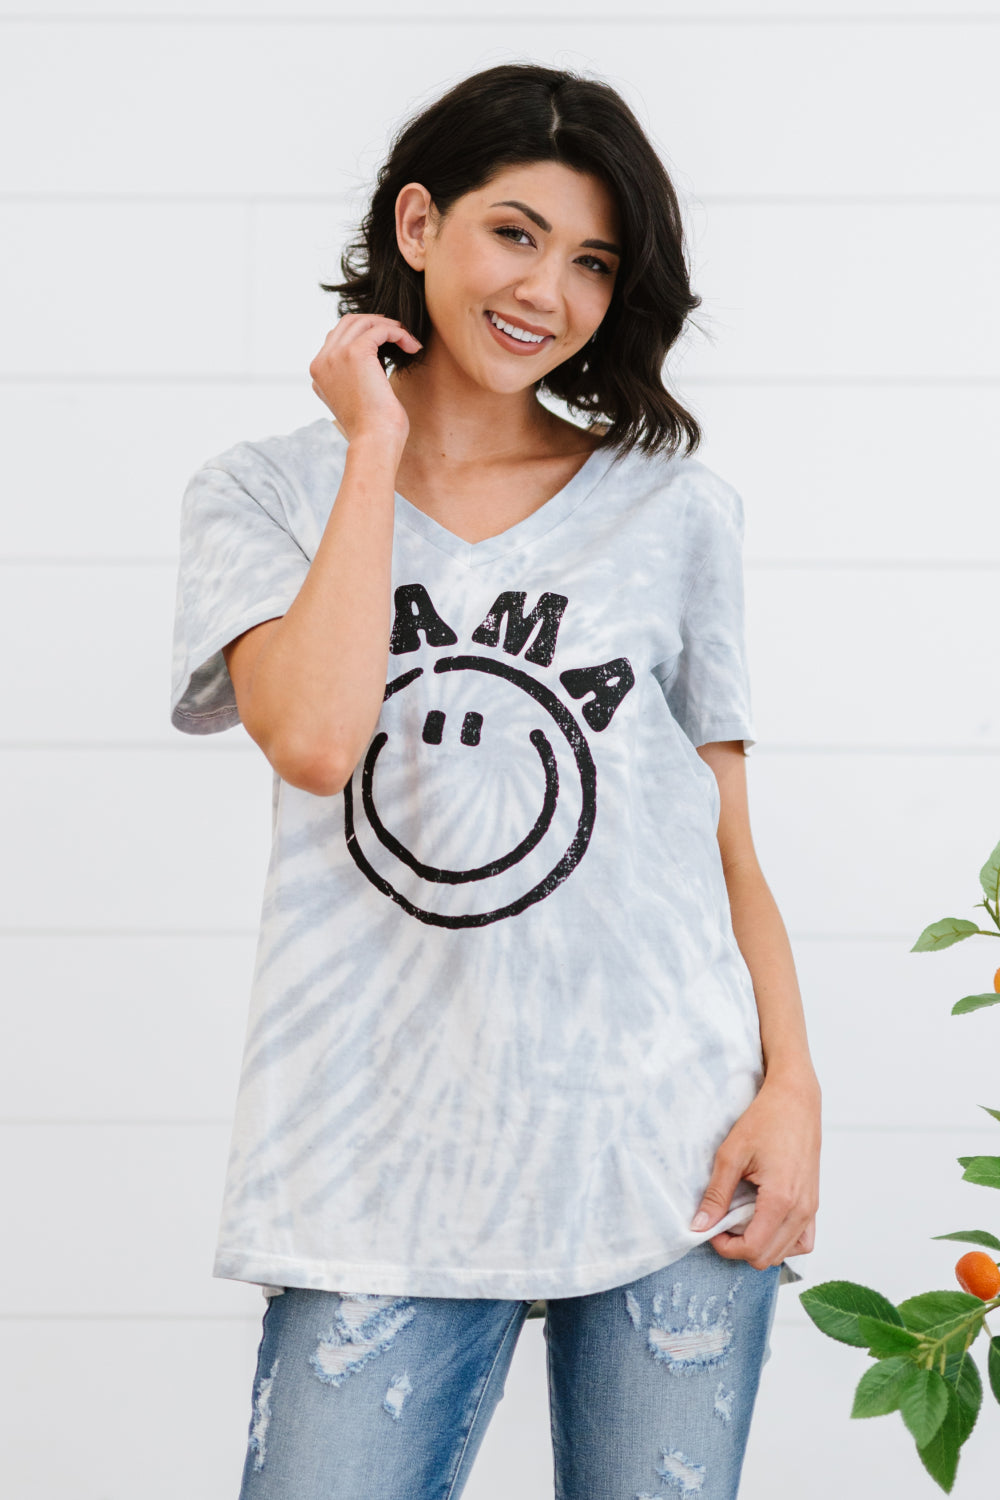 Sew In Love MAMA Smile Graphic Tie-Dye Tee Shirt